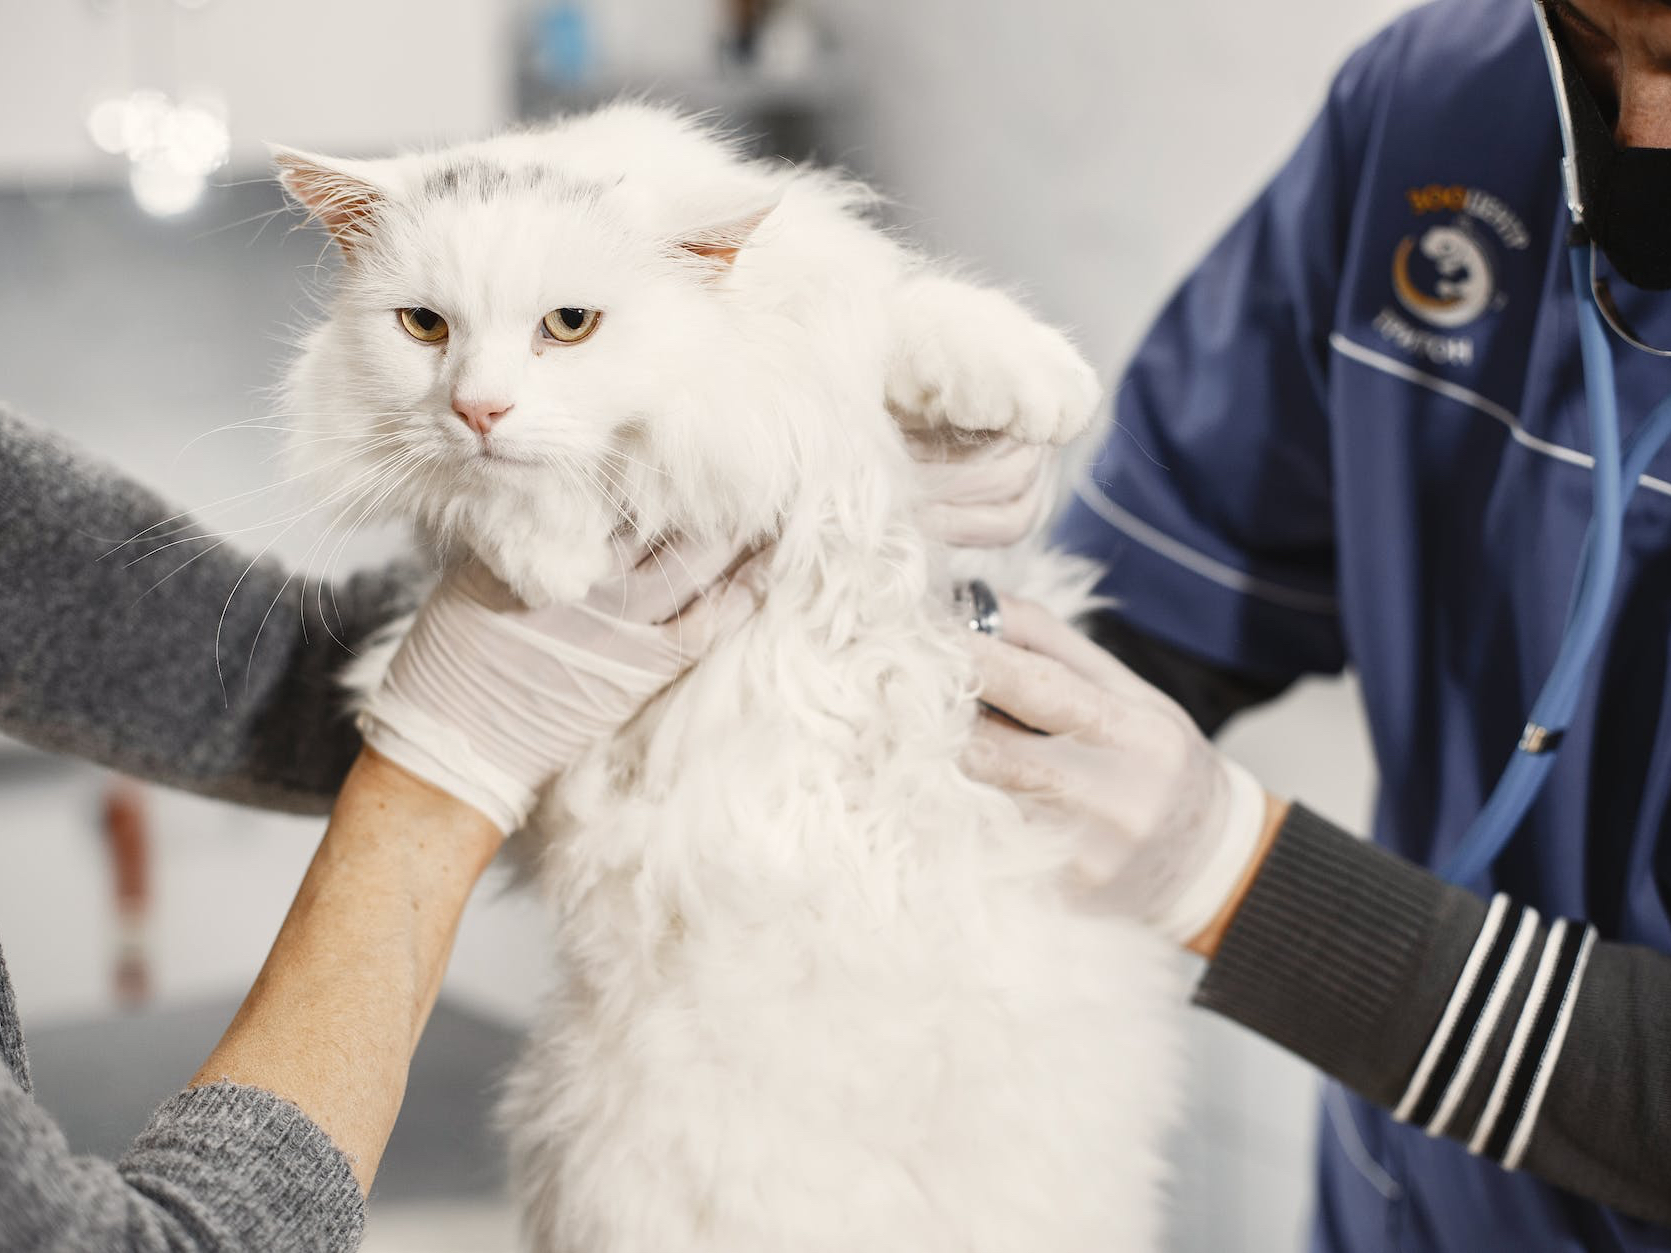 white cat being held by two people, while one person is using a stethoscope on the cat